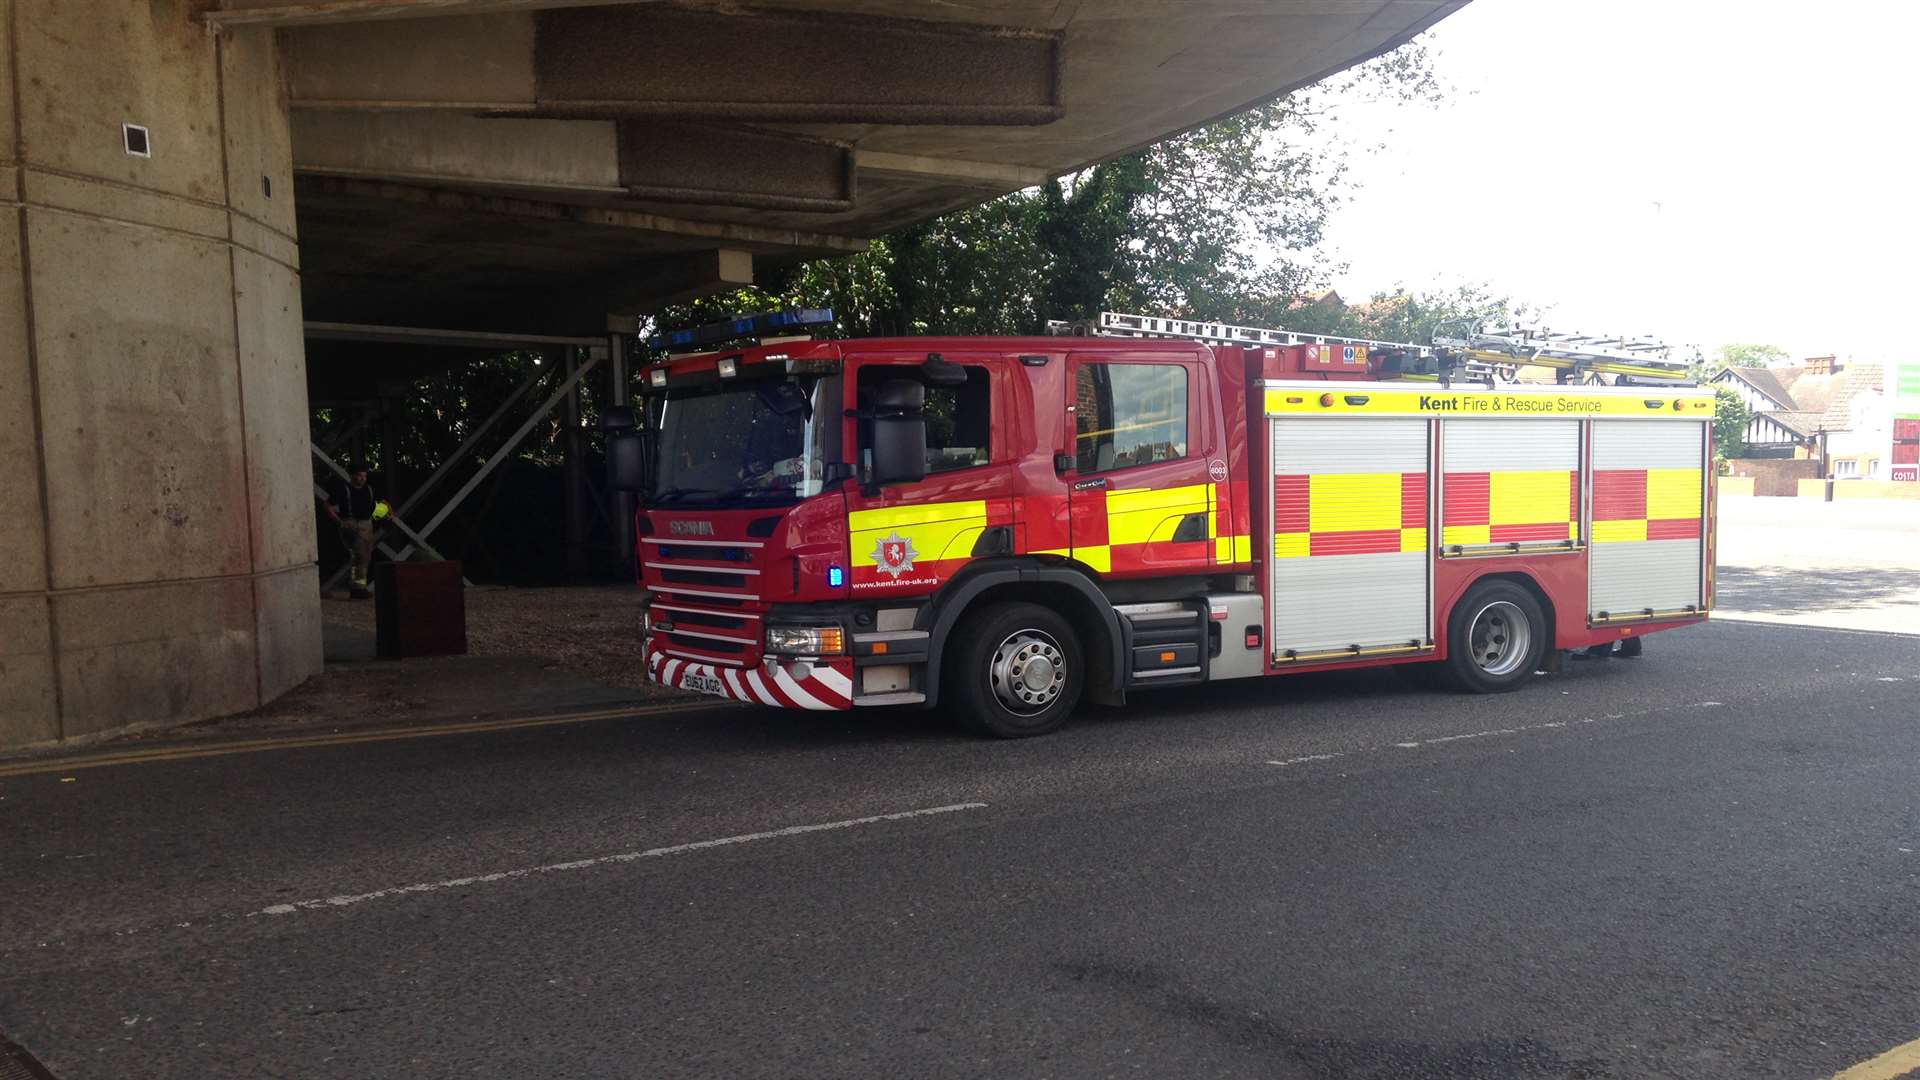 The fire service were called because of a bonfire burning under the ramp to the car park